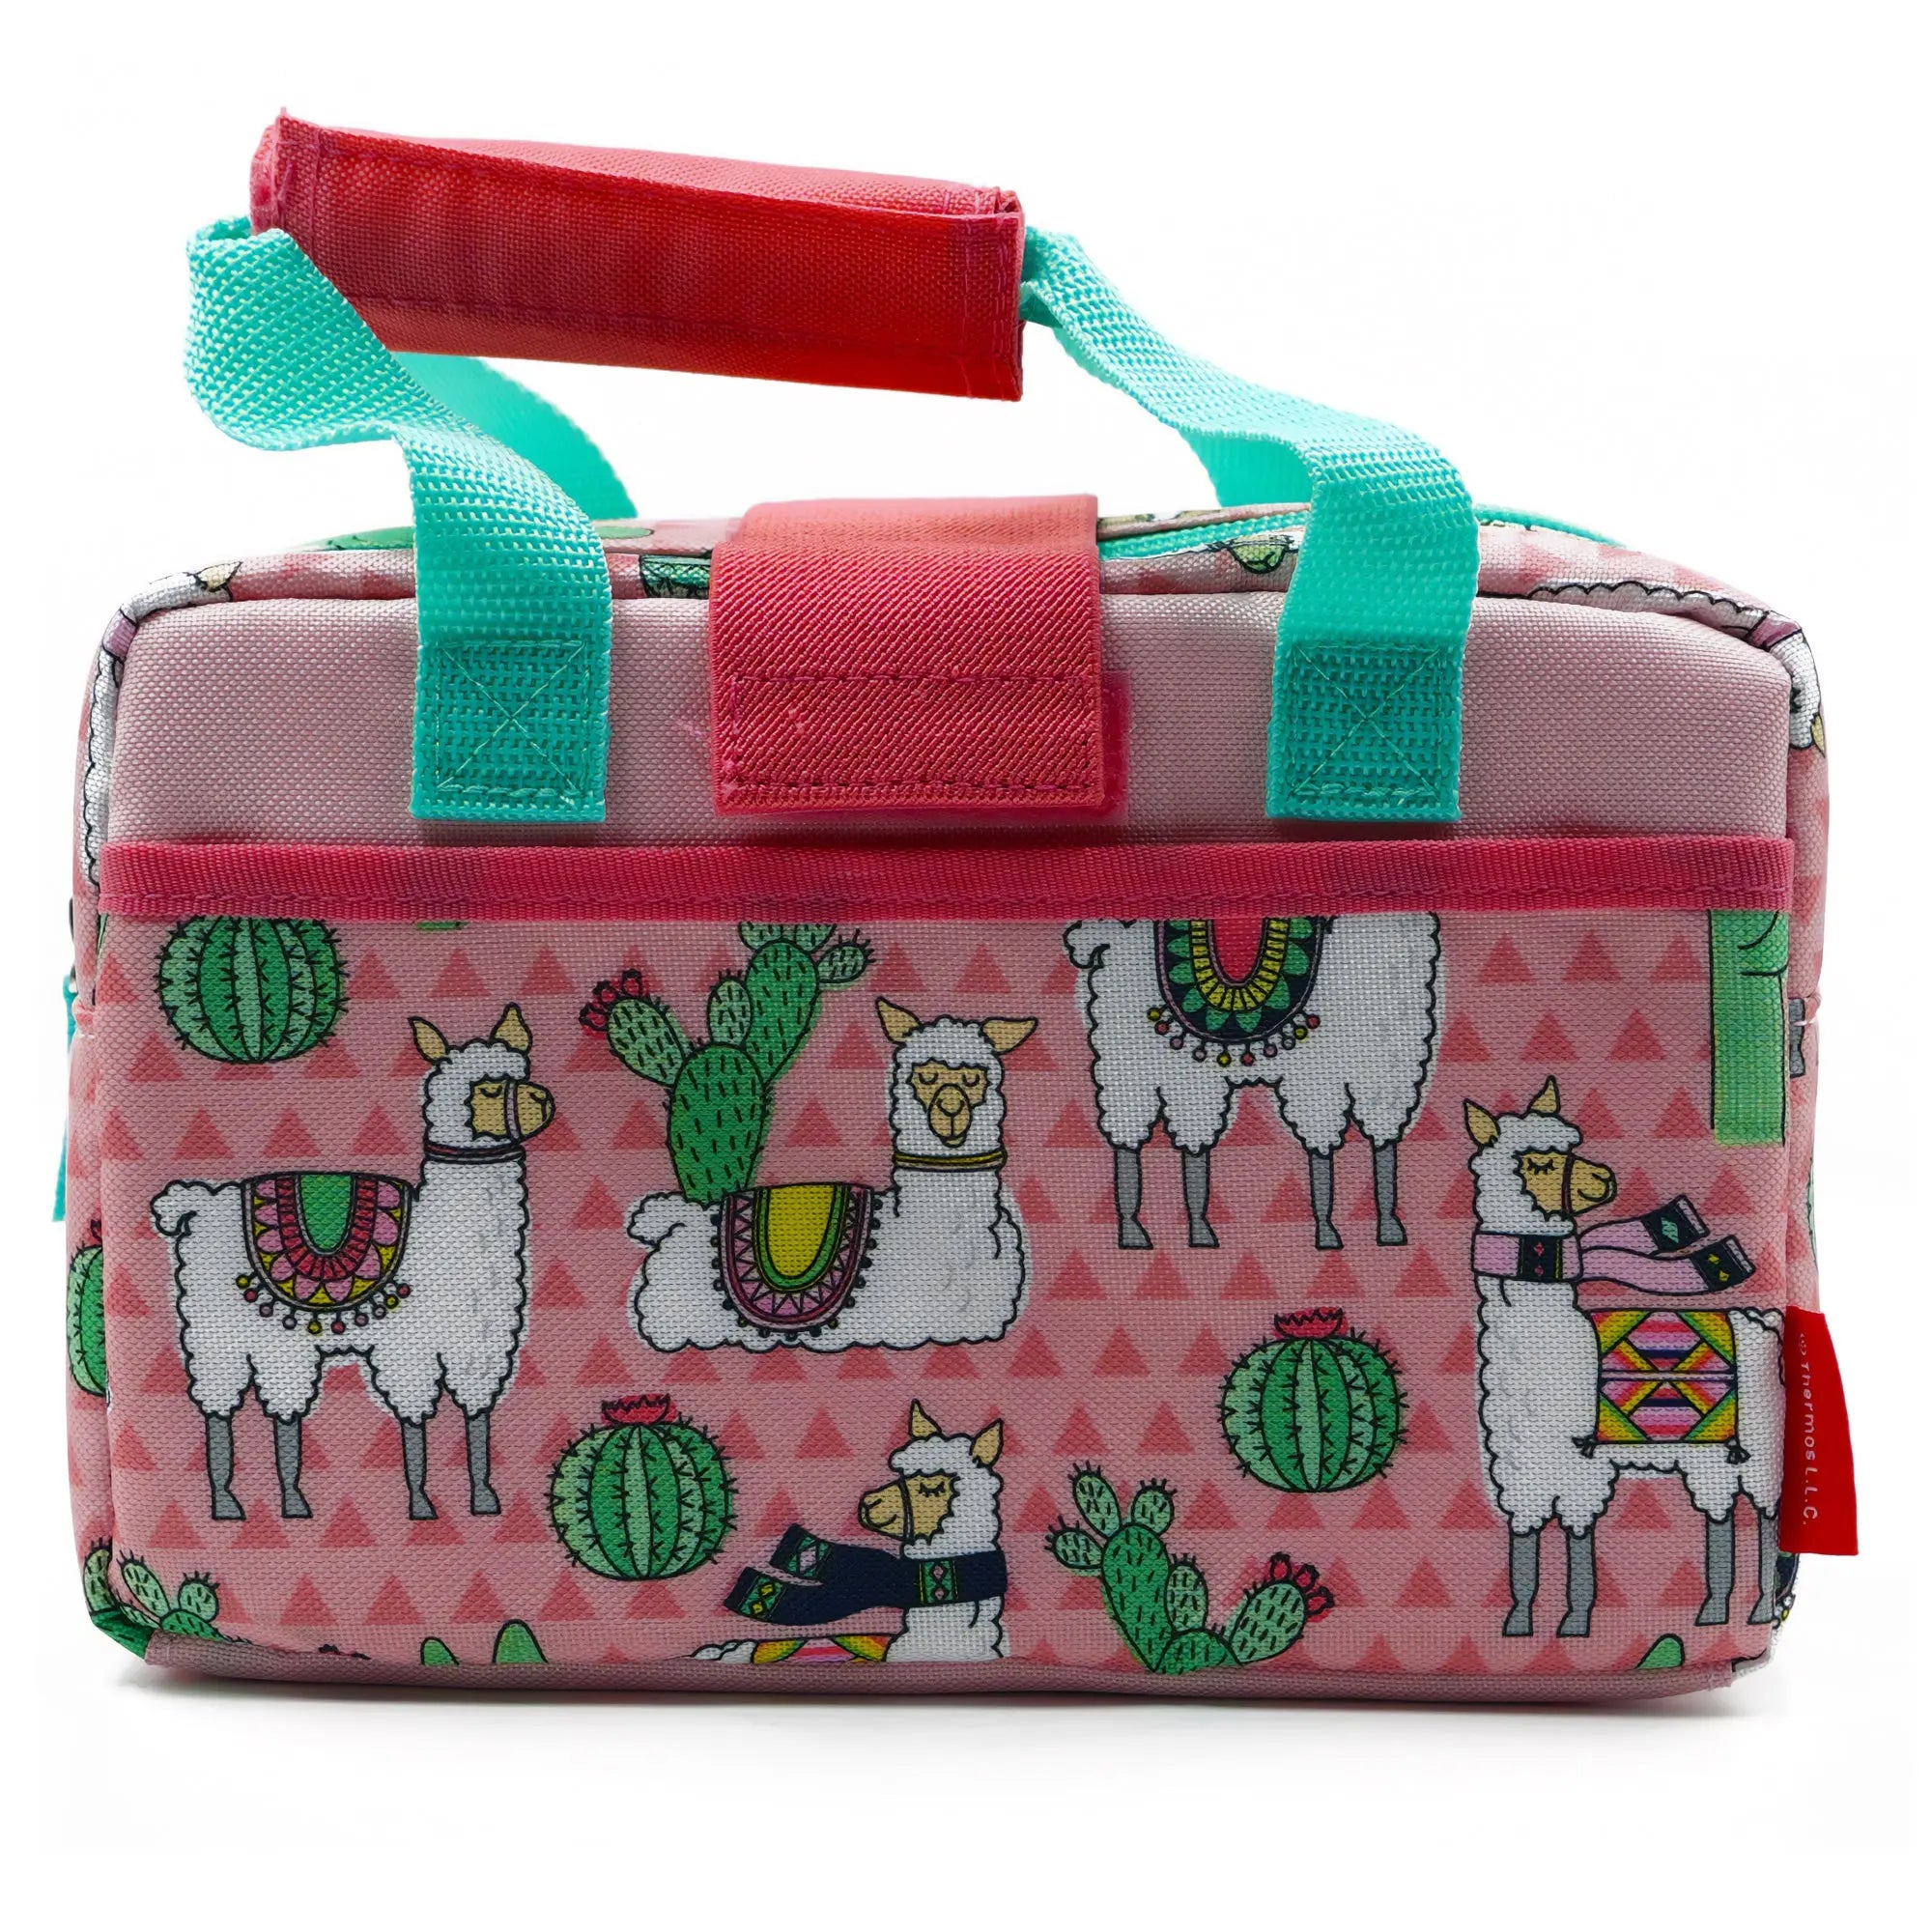 Thermos Kid's Funtainer Desert Llama Lunch Duffle Bag - Pink/Teal Thermos